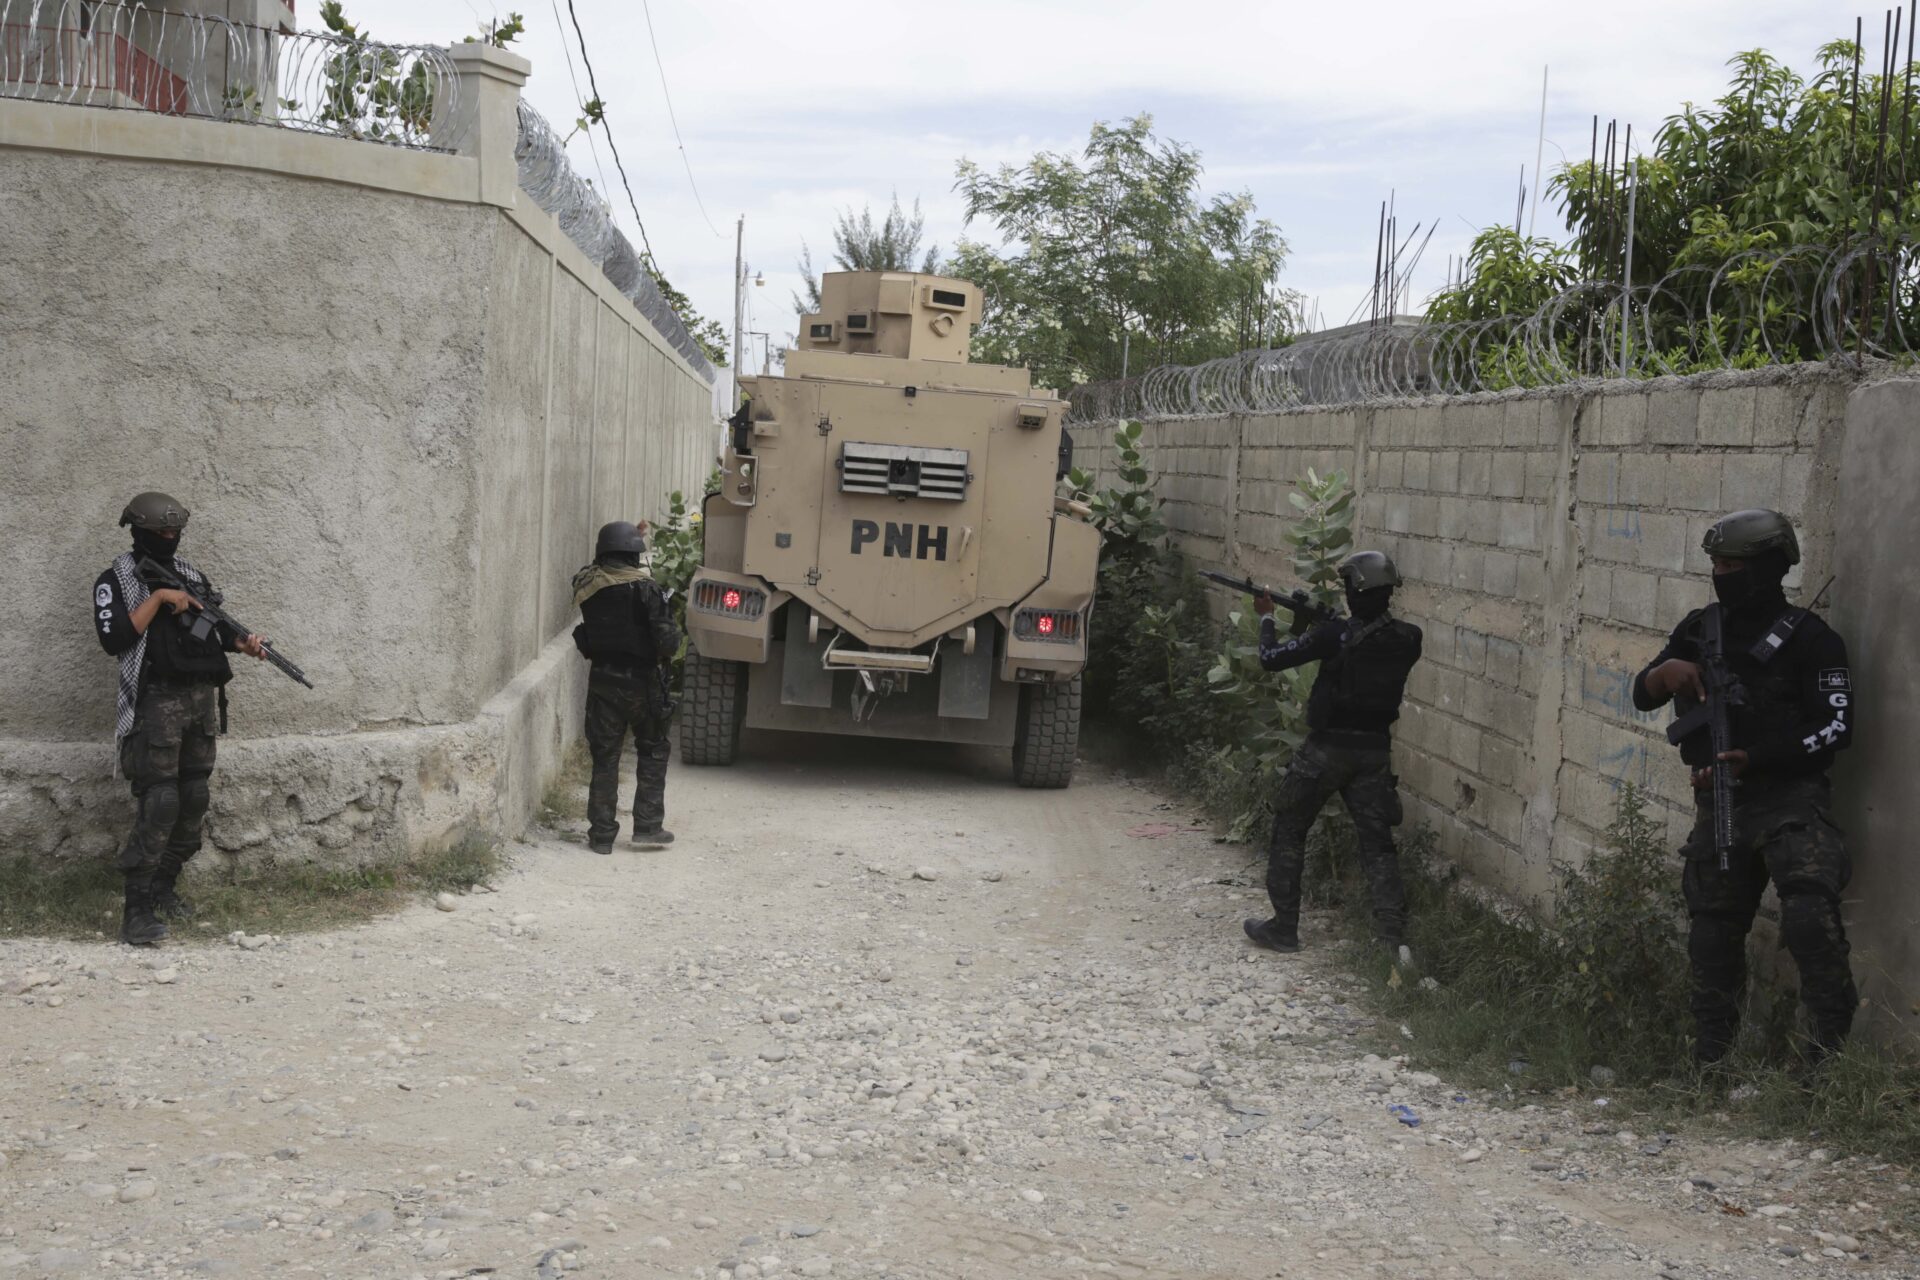 Four officers dressed in black jackets, black helmets and dark fatigue-patterned pants are positioned along a narrow dirt road that has stone walls on both sides. They carry rifles. One of them is aiming it toward a tan-coloured large, boxy police vehicle that is a few feet down the road. Barbed wire sits on top of the walls.